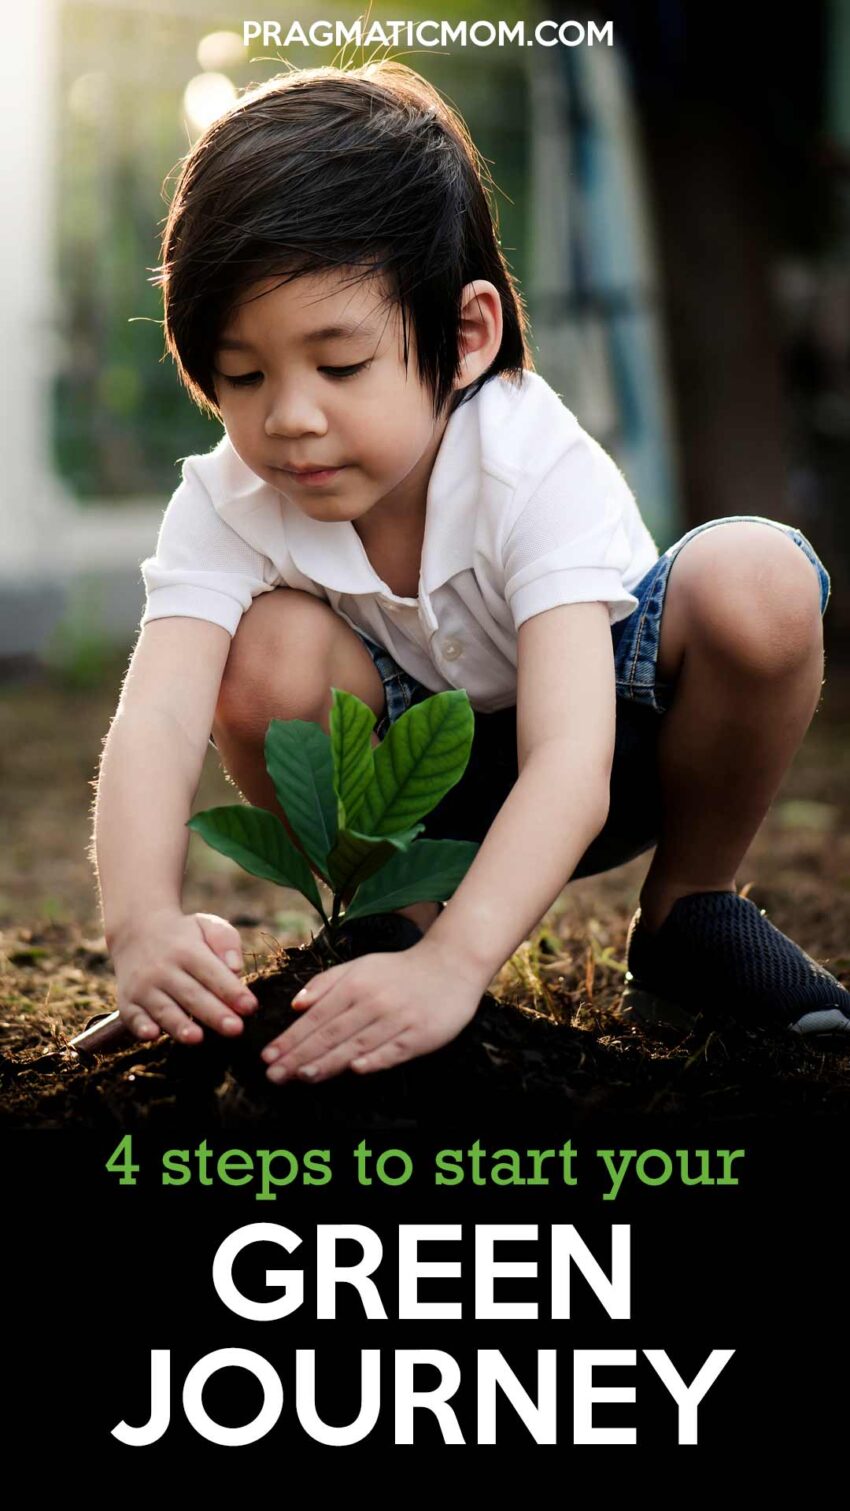 4 Simple Steps to Start Your Green Journey Today